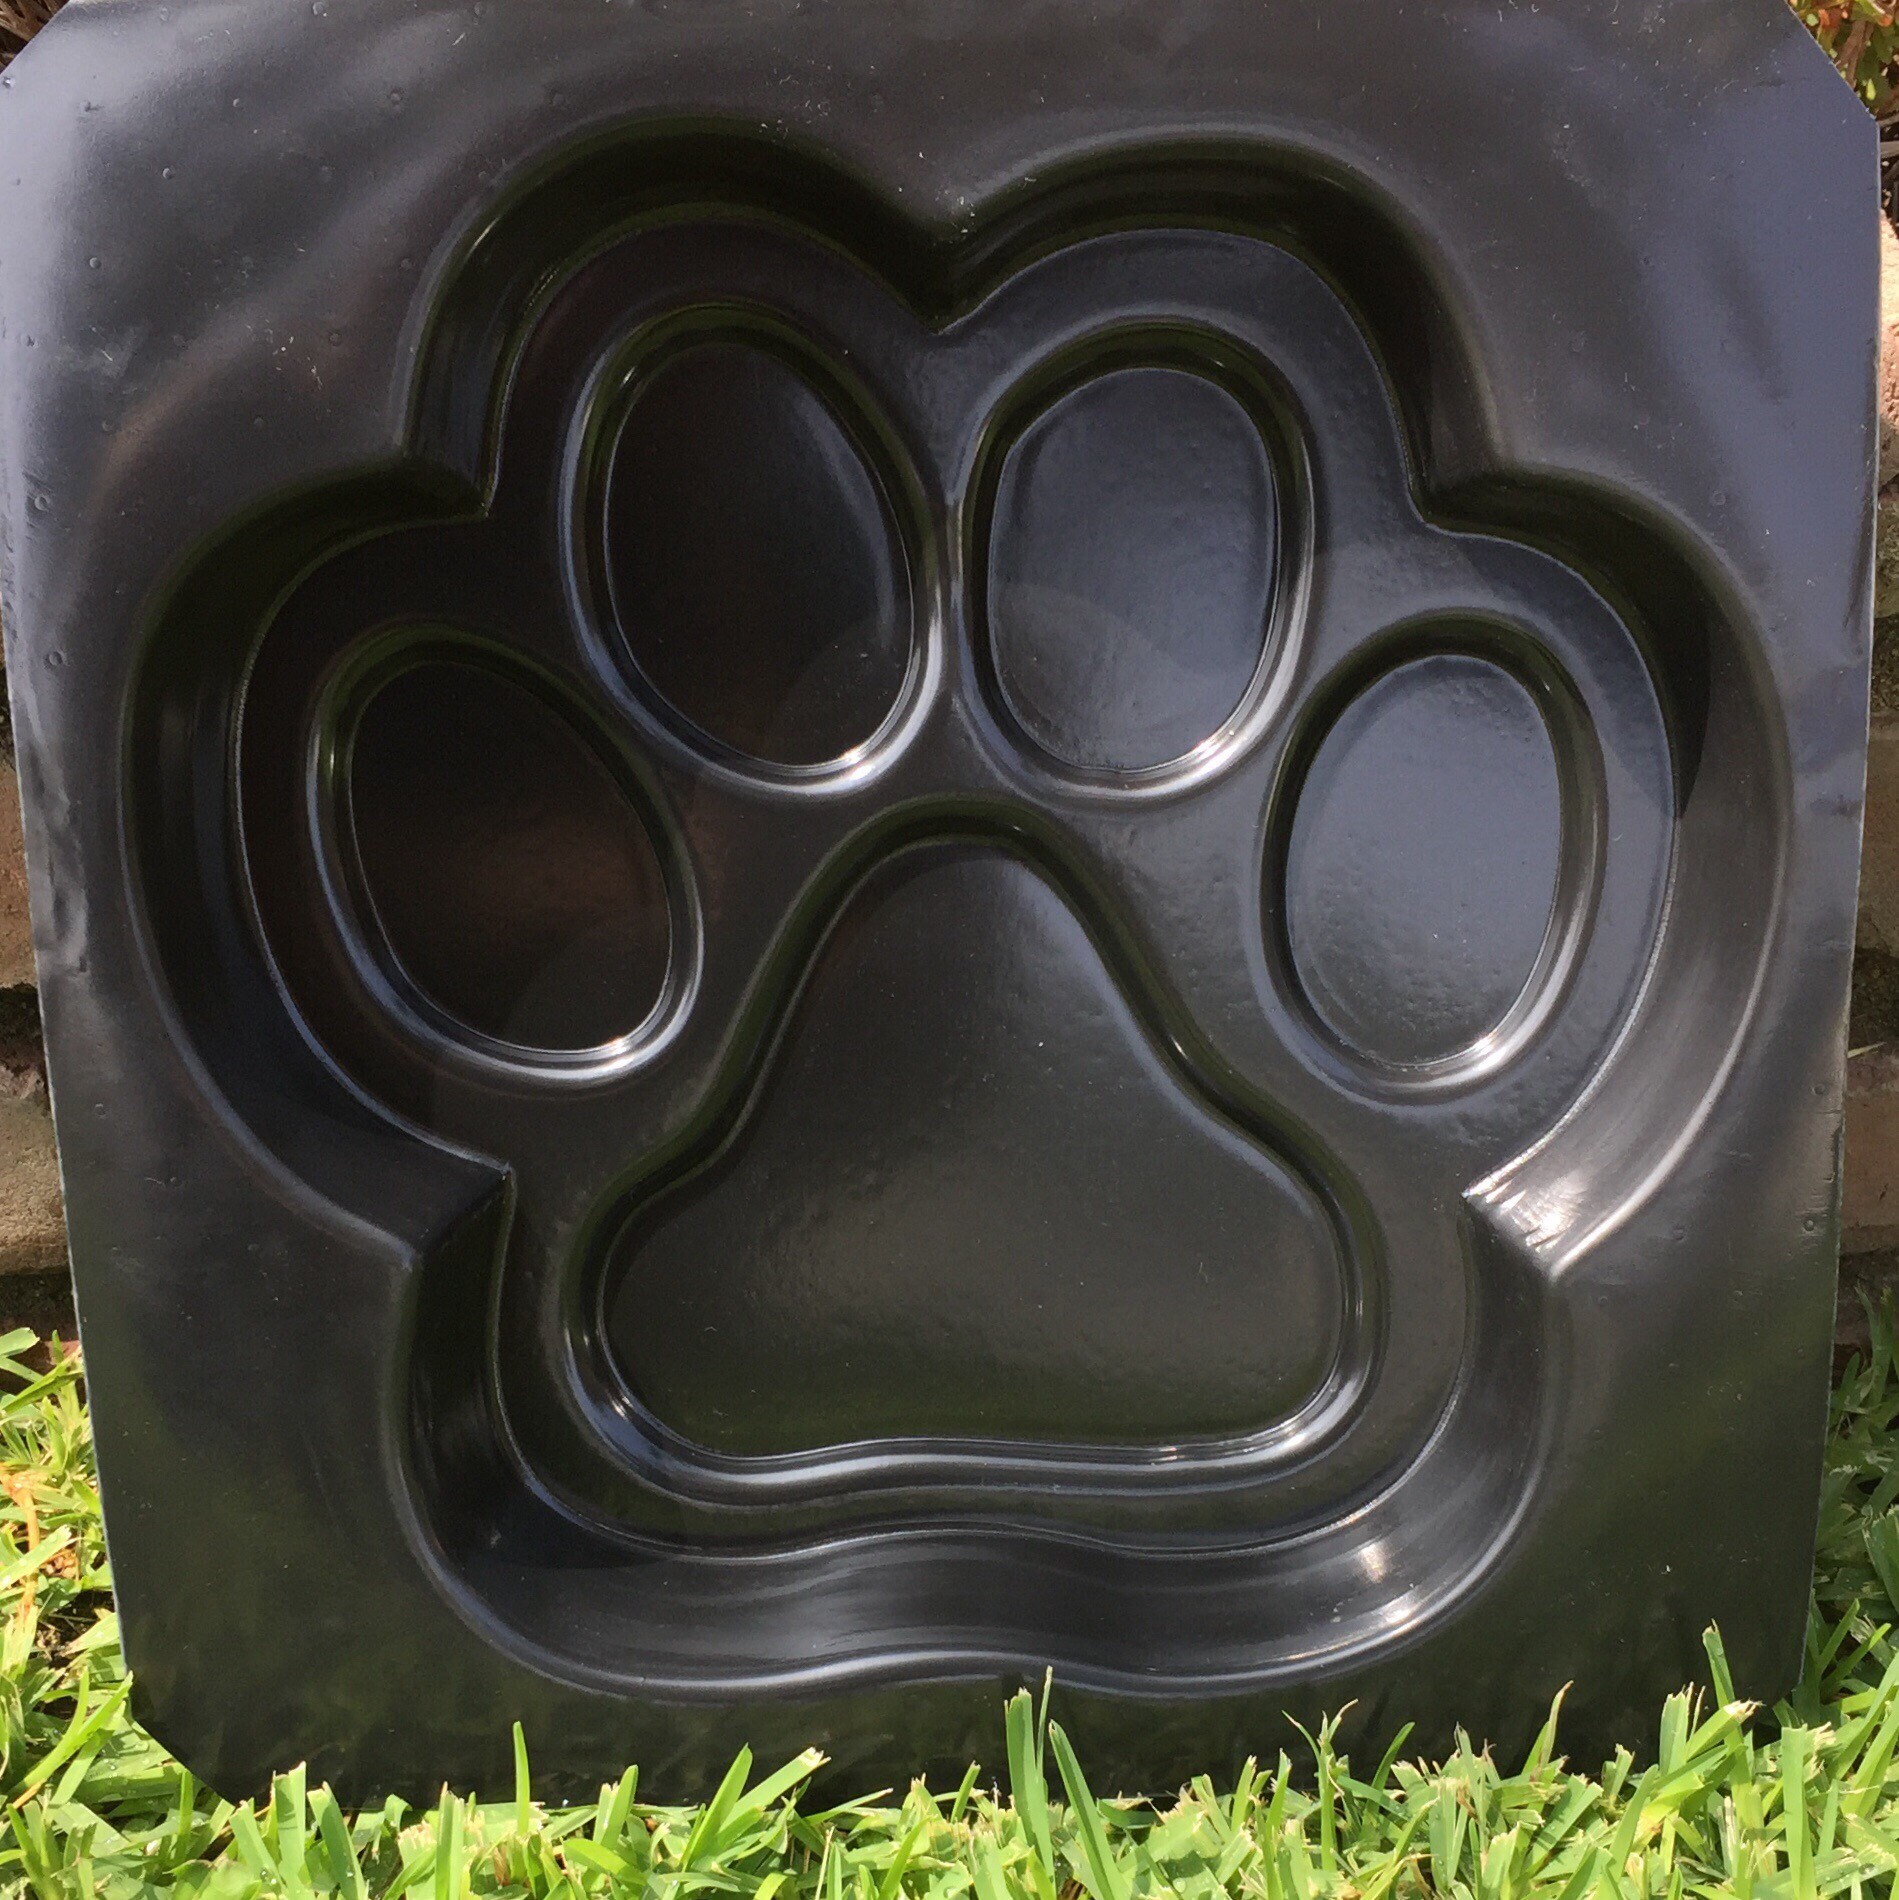 Bulldog stepping stone abs plastic mould concrete mold 10" x 1.5" thick 